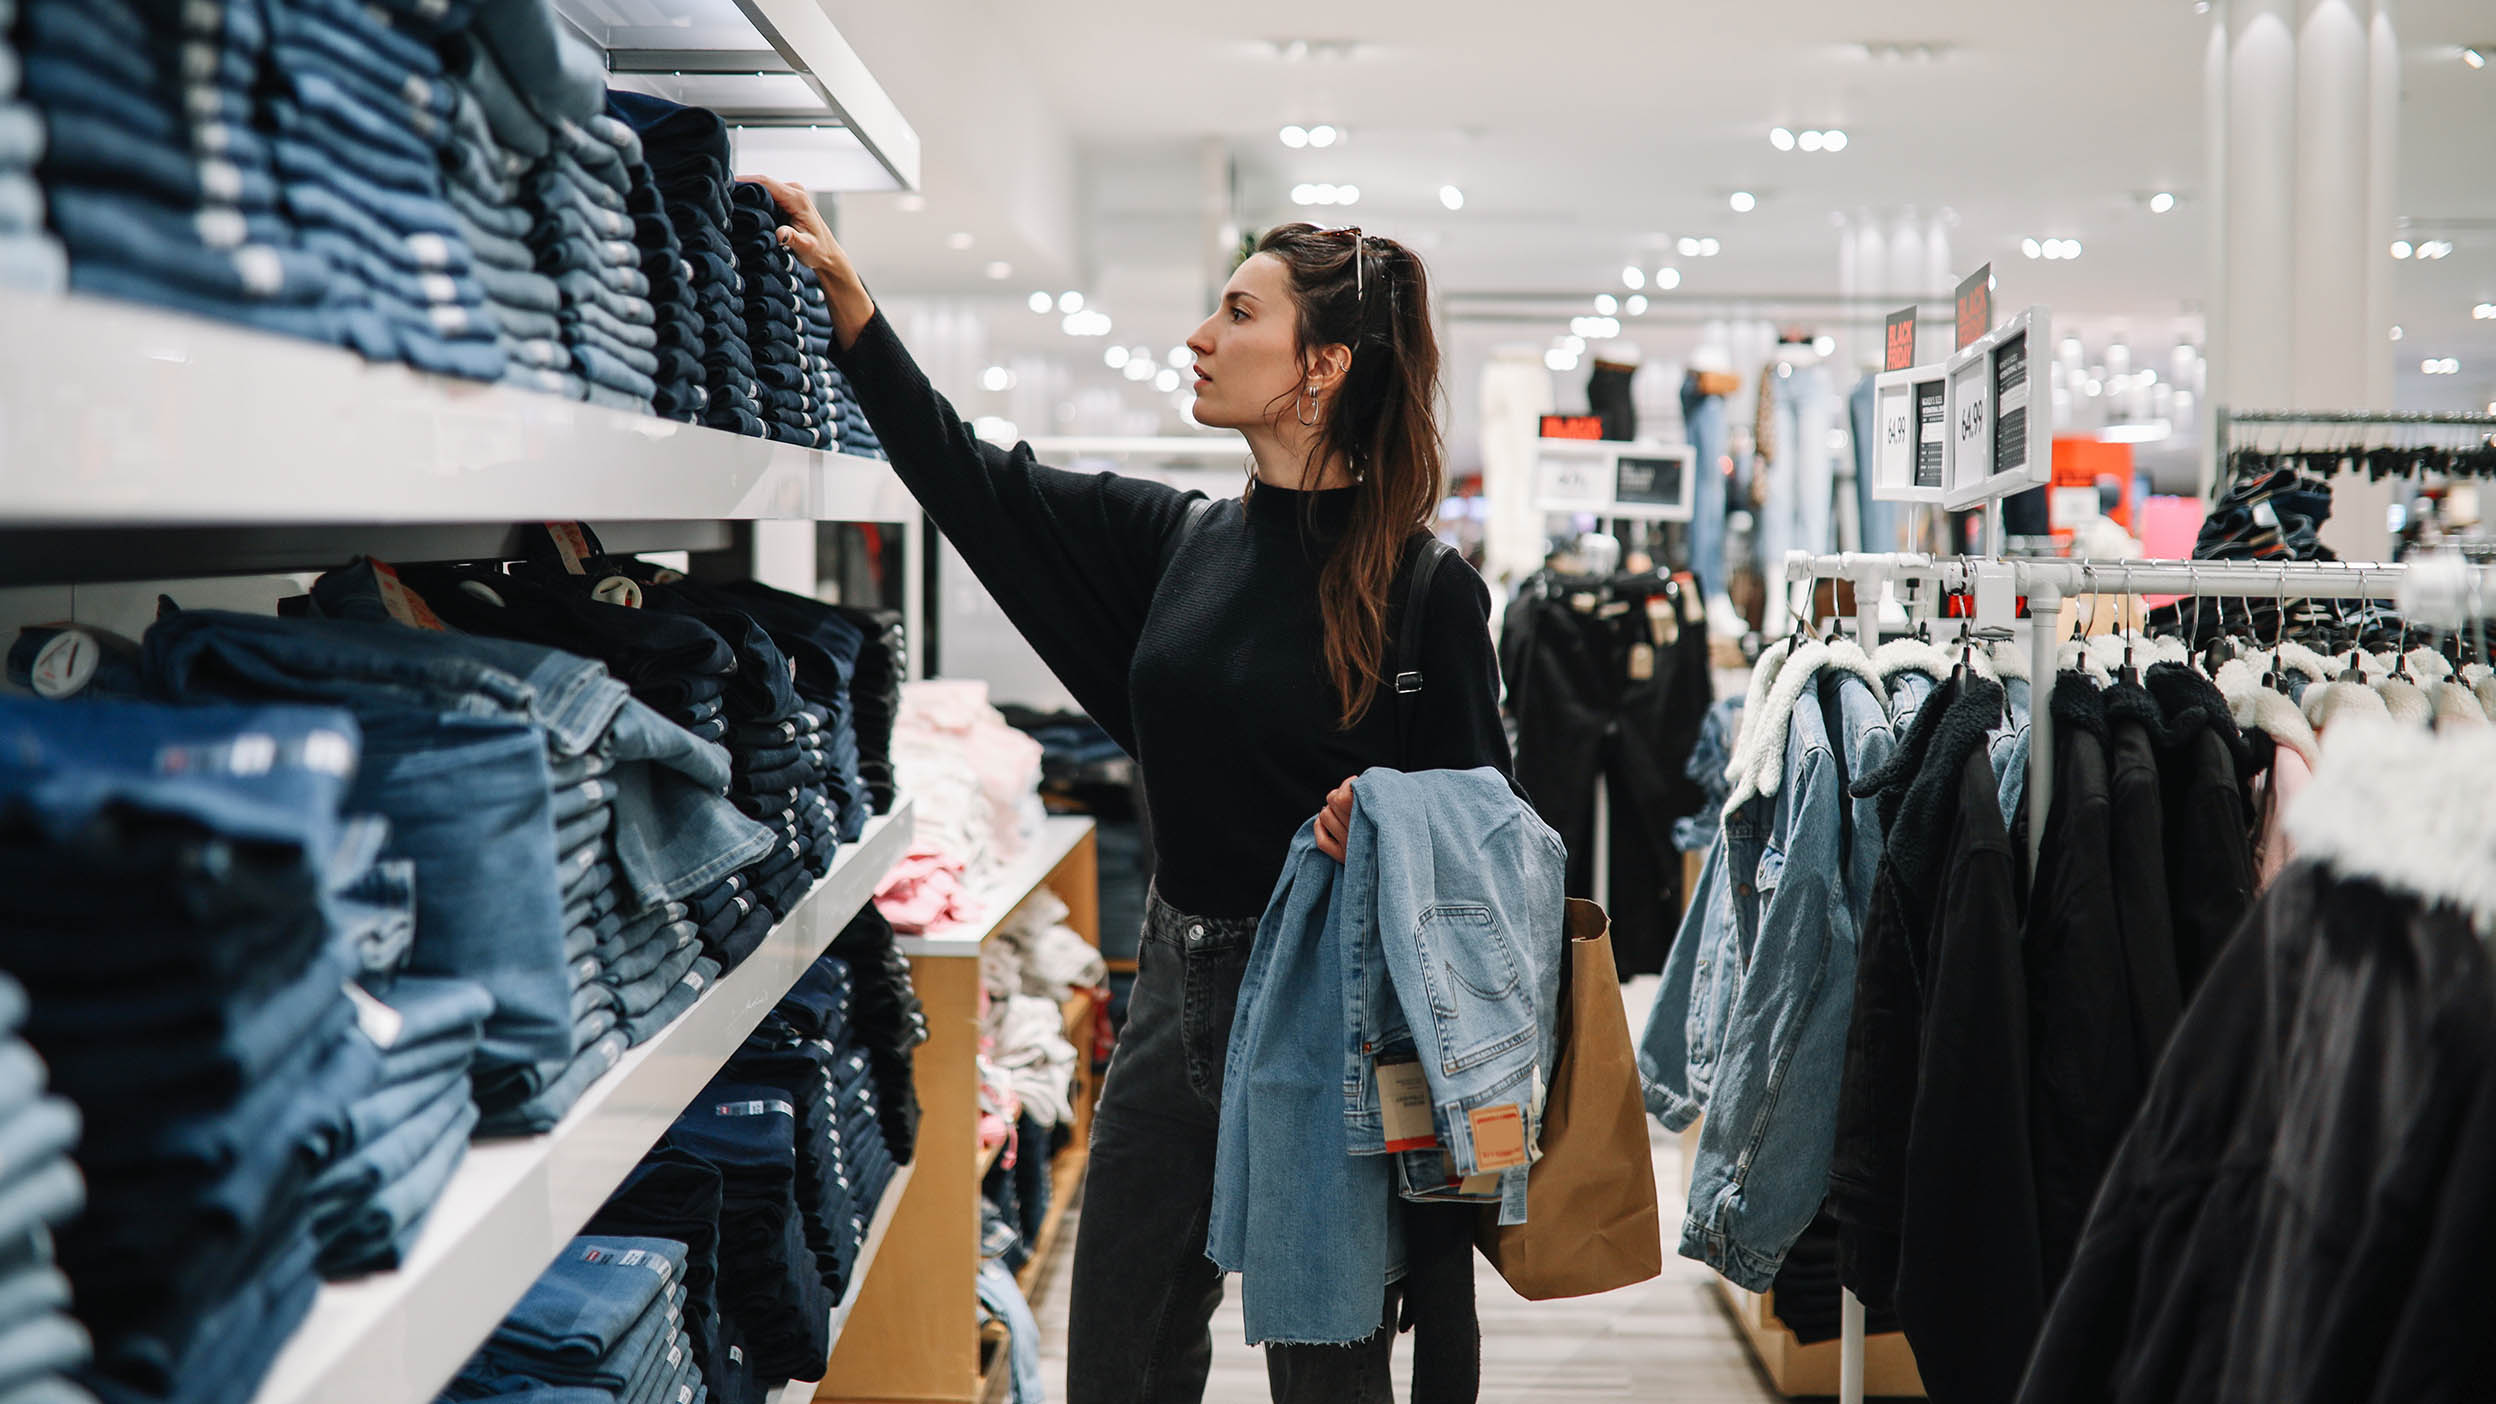 Woman in mid 30s goes shopping for denim jeans in a clothing store.